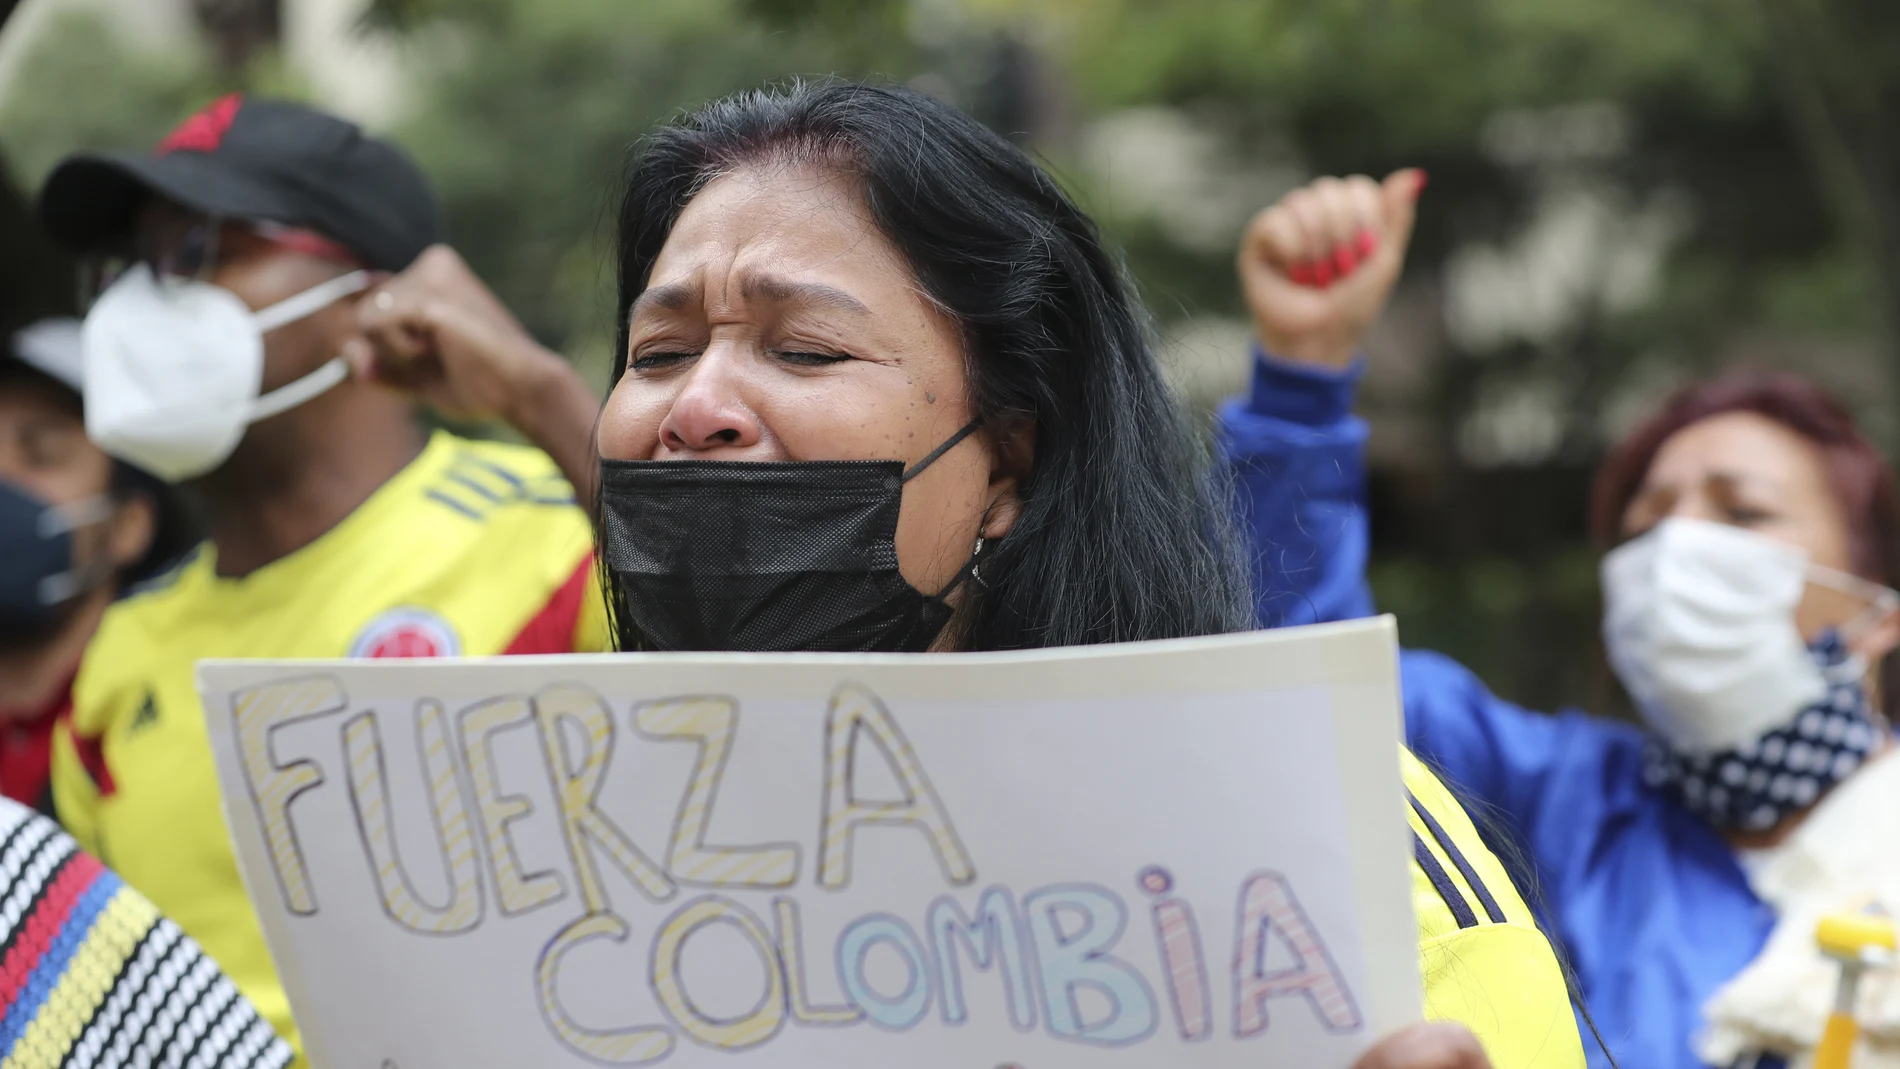 A woman cries as she sings the Colombian national anthem, during a demonstration outside Colombia's embassy in Quito, Ecuador, Tuesday, May 4, 2021. The demonstration is in support of the protests going on in Colombia over the tax reform proposal by the government that has left several dead in that country. (AP Photo/Dolores Ochoa)